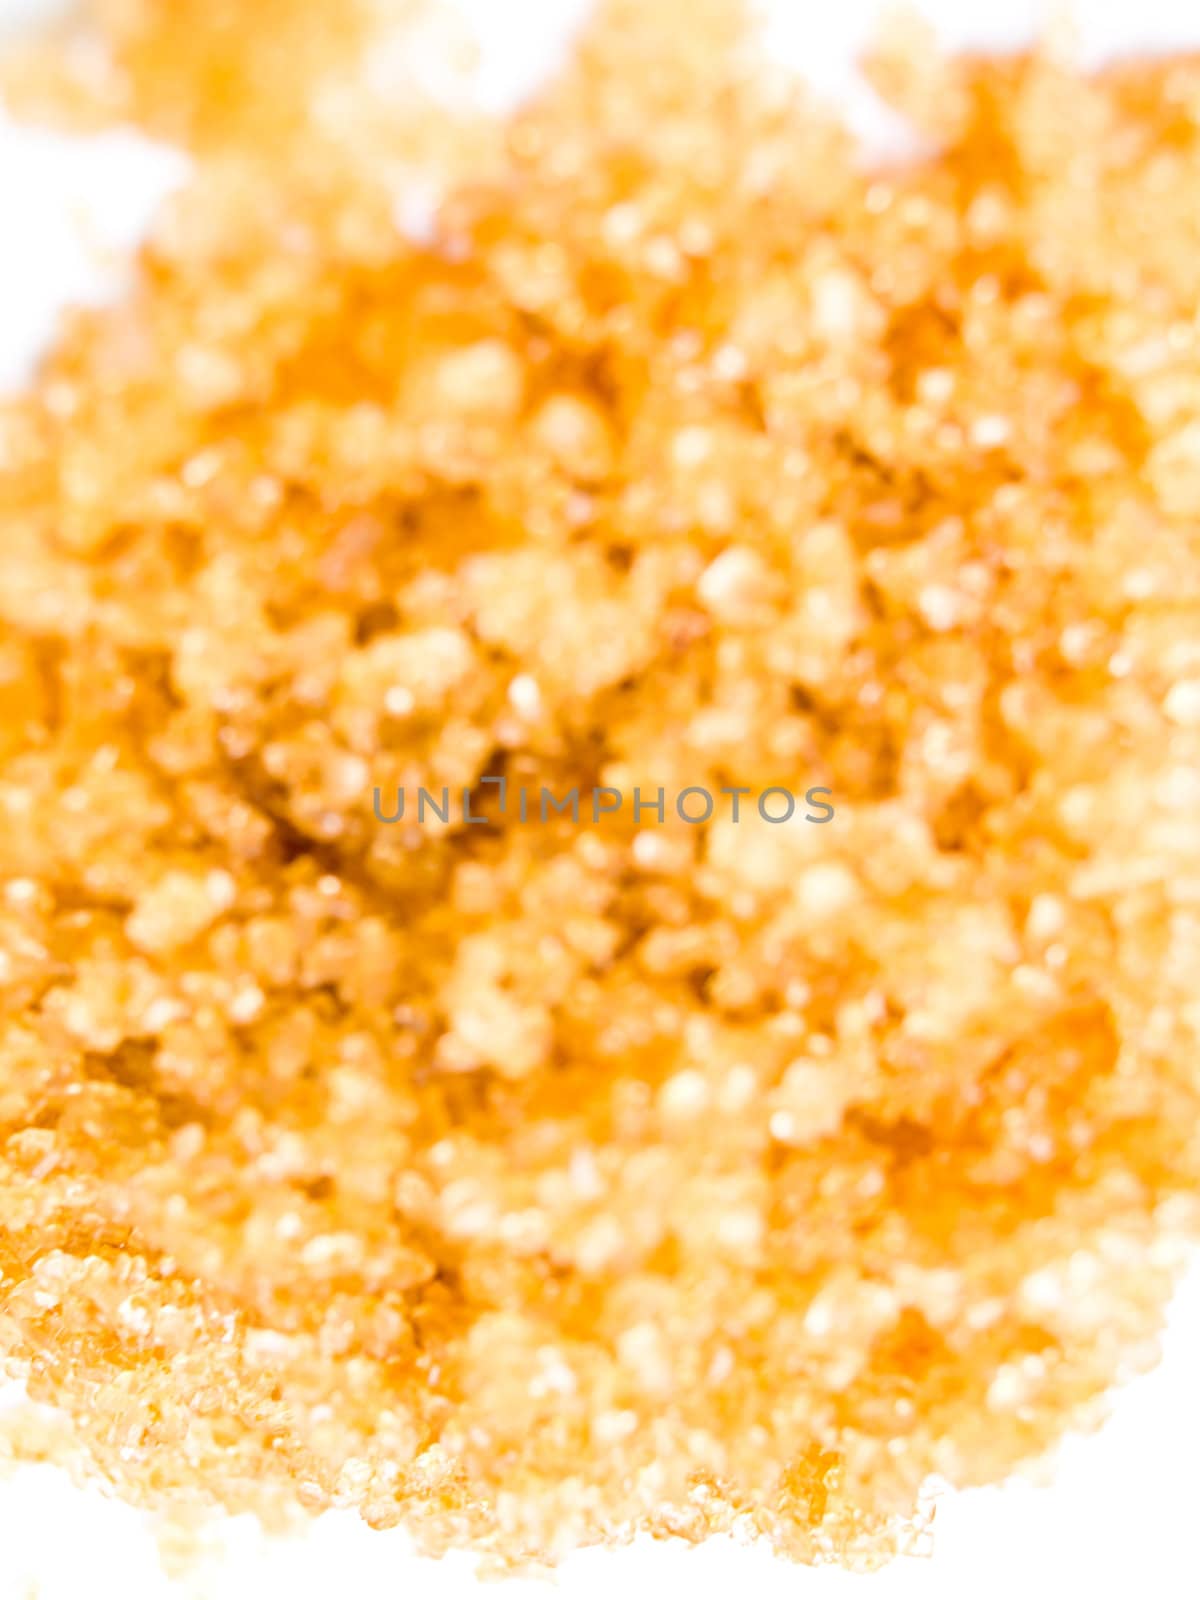 Brown sugar from Top view isolated on white background